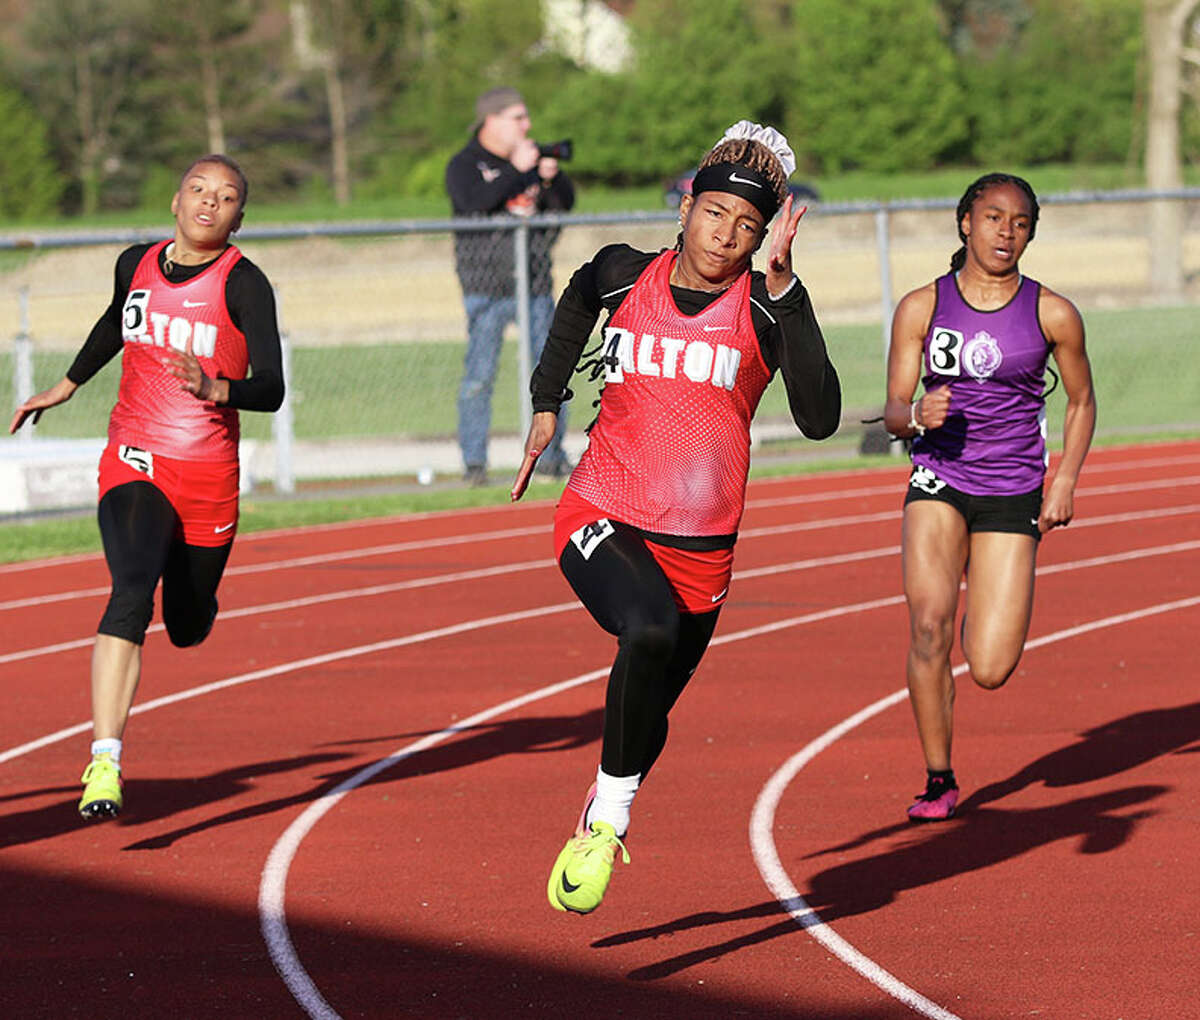 Alton's Renee Raglin (middle) leads teammate Khaliyah Goree (left) and Collinsville's Deairra Spears through the turn in the 200 meters on Tuesday at the Madison County large-schools girls track meet in Edwardsville. 